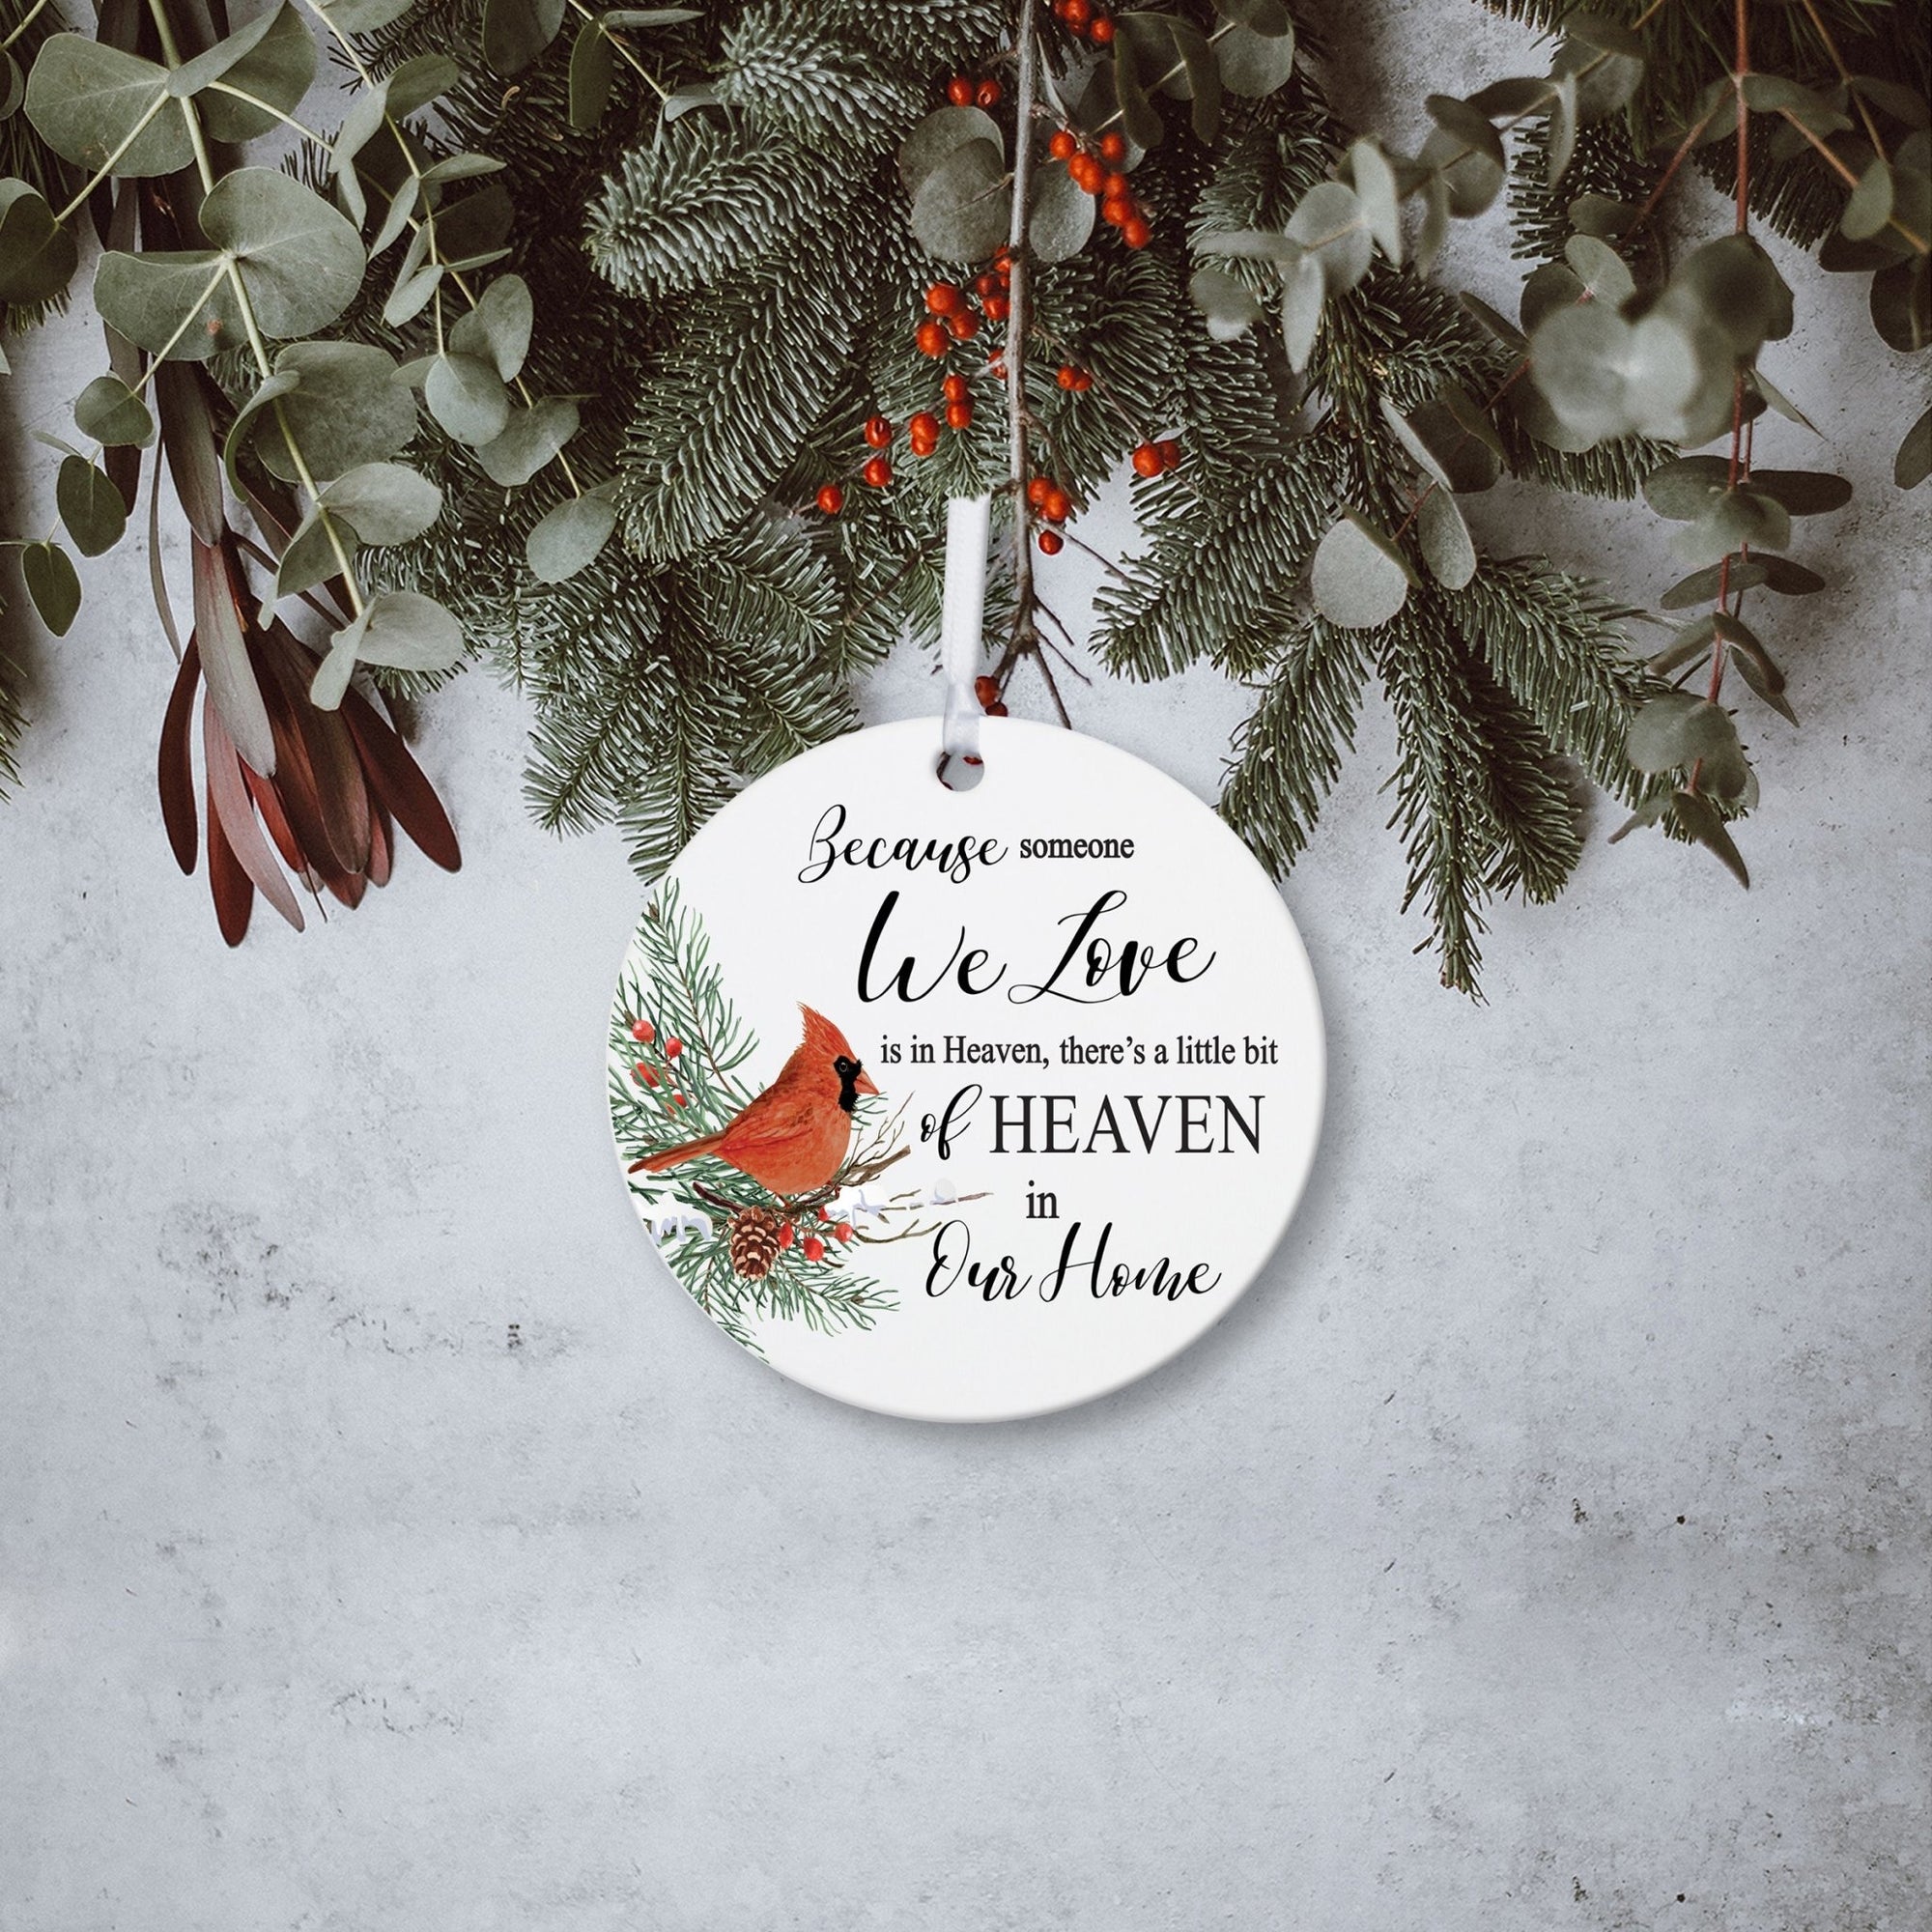 A delicate, heartwarming memory Christmas ornament for loss loved ones, featuring a touching design.